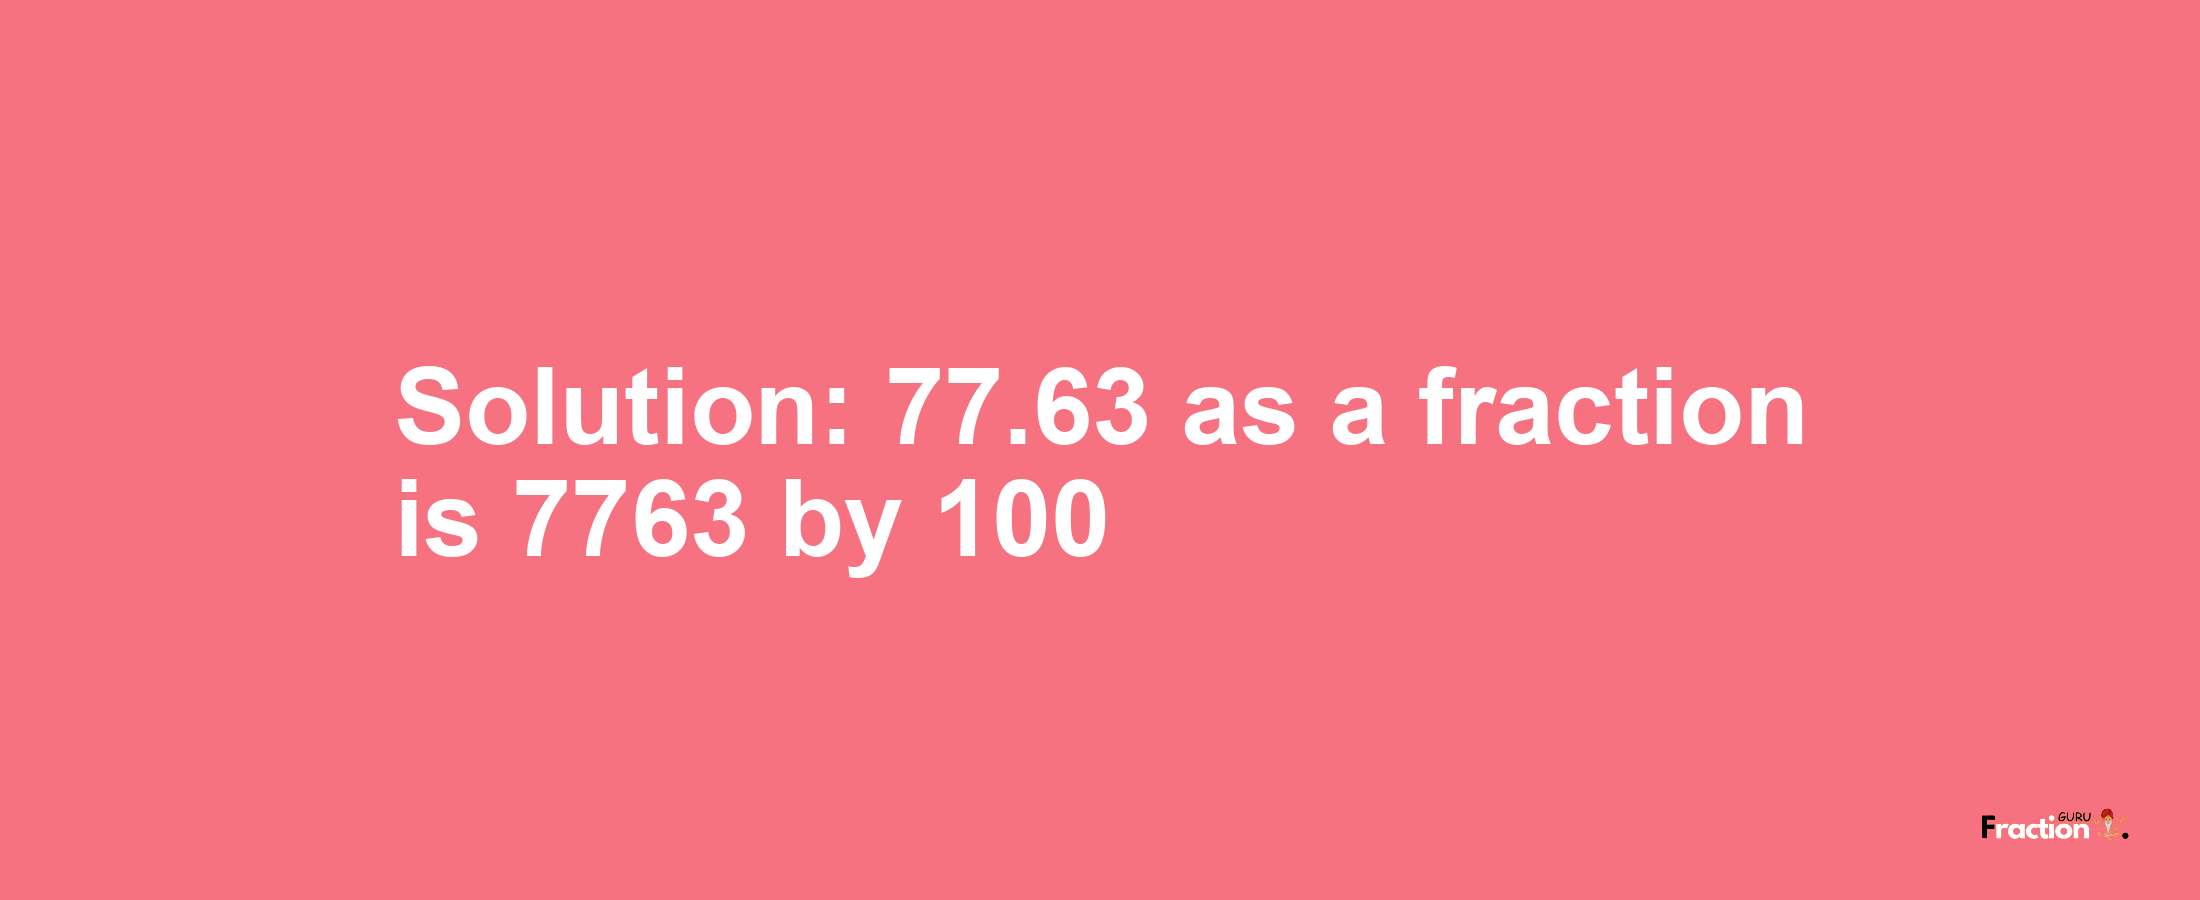 Solution:77.63 as a fraction is 7763/100